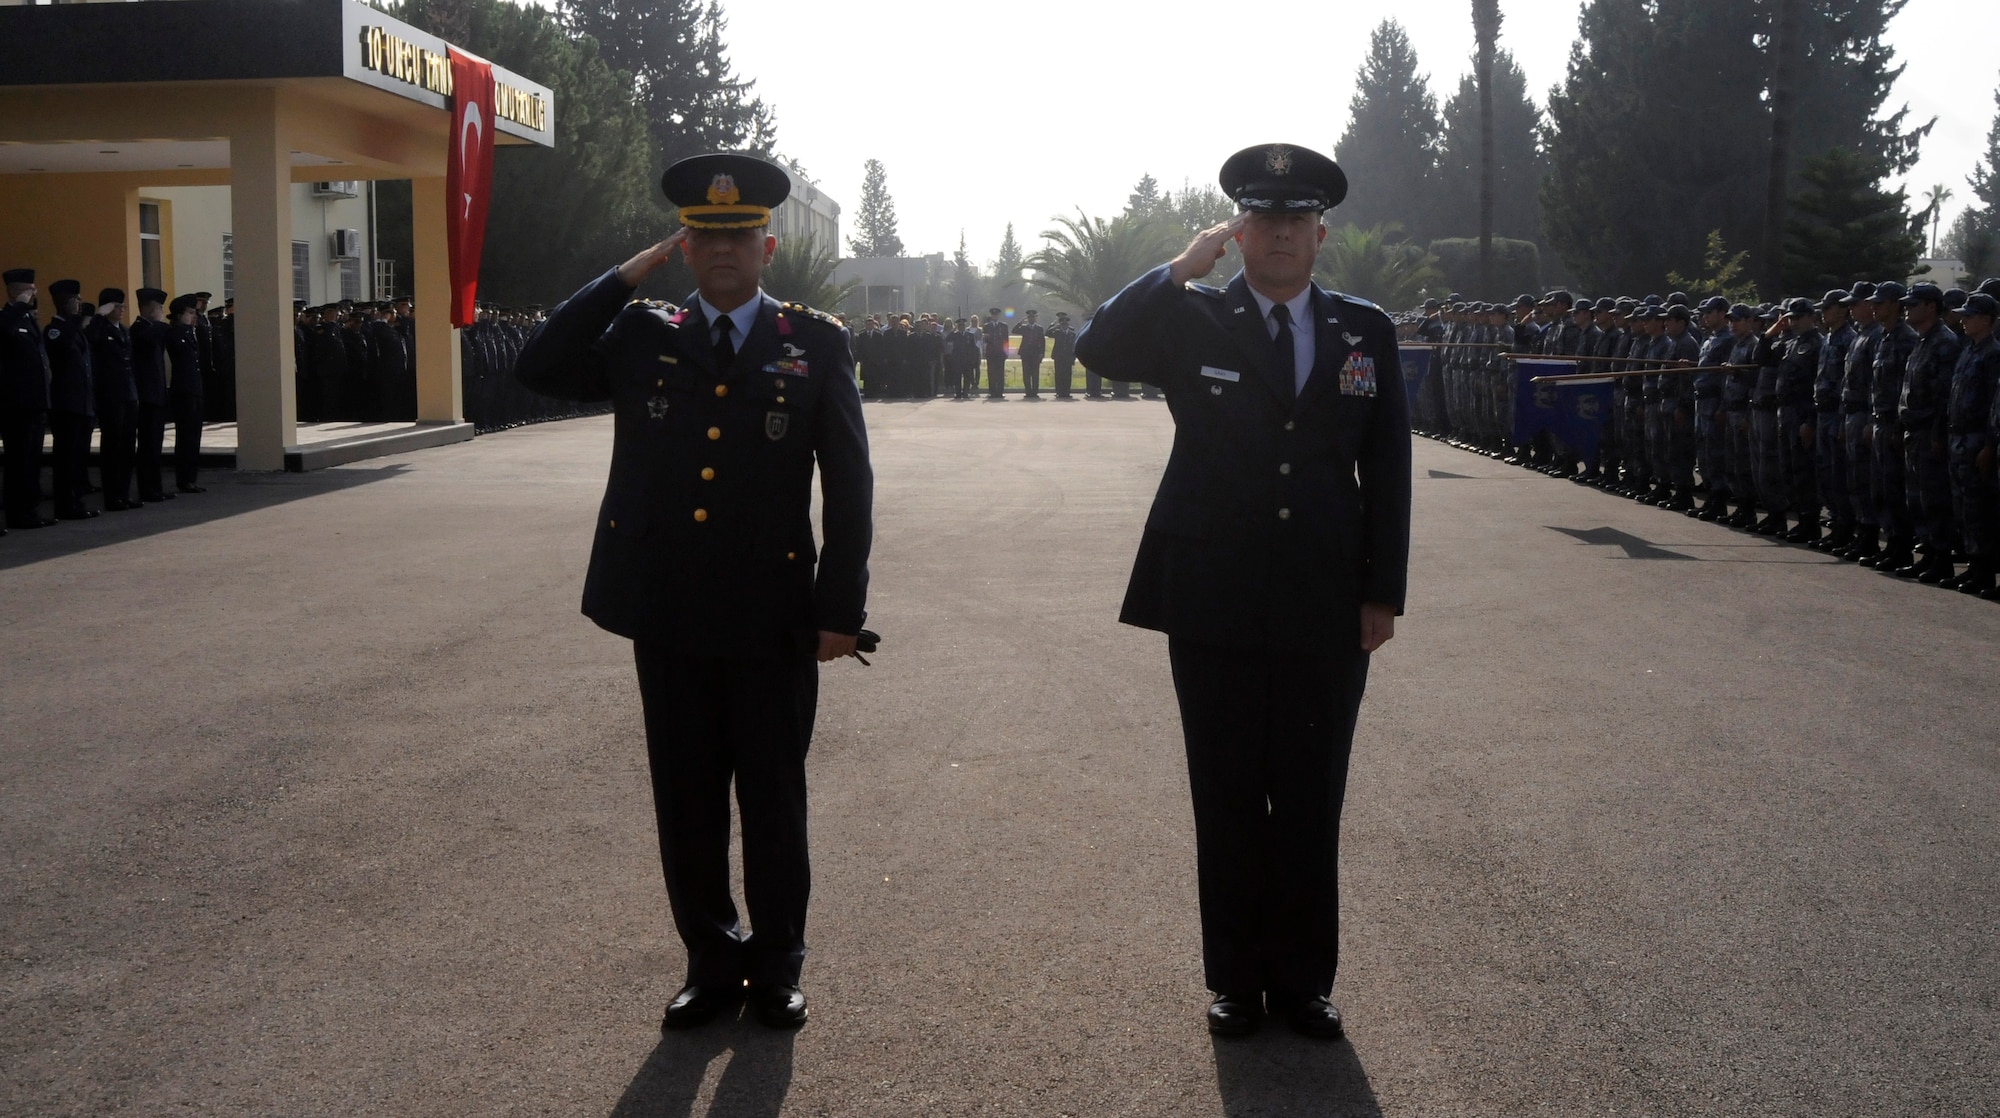 Col. Deniz Kartepe, 10th Tanker Base operations commander, and Col. Lawrence Gray, 39th Air Base Wing vice commander, salute to Turkey’s national anthem during the Ataturk Memorial Day Ceremony, Tuesday, Nov. 10, 2009 in front of the 10th Tanker Base Command Headquarters. The ceremony was open to all members of the Incirlik community.  (U.S. Air Force photo/Airman 1st Class Amber Ashcraft)